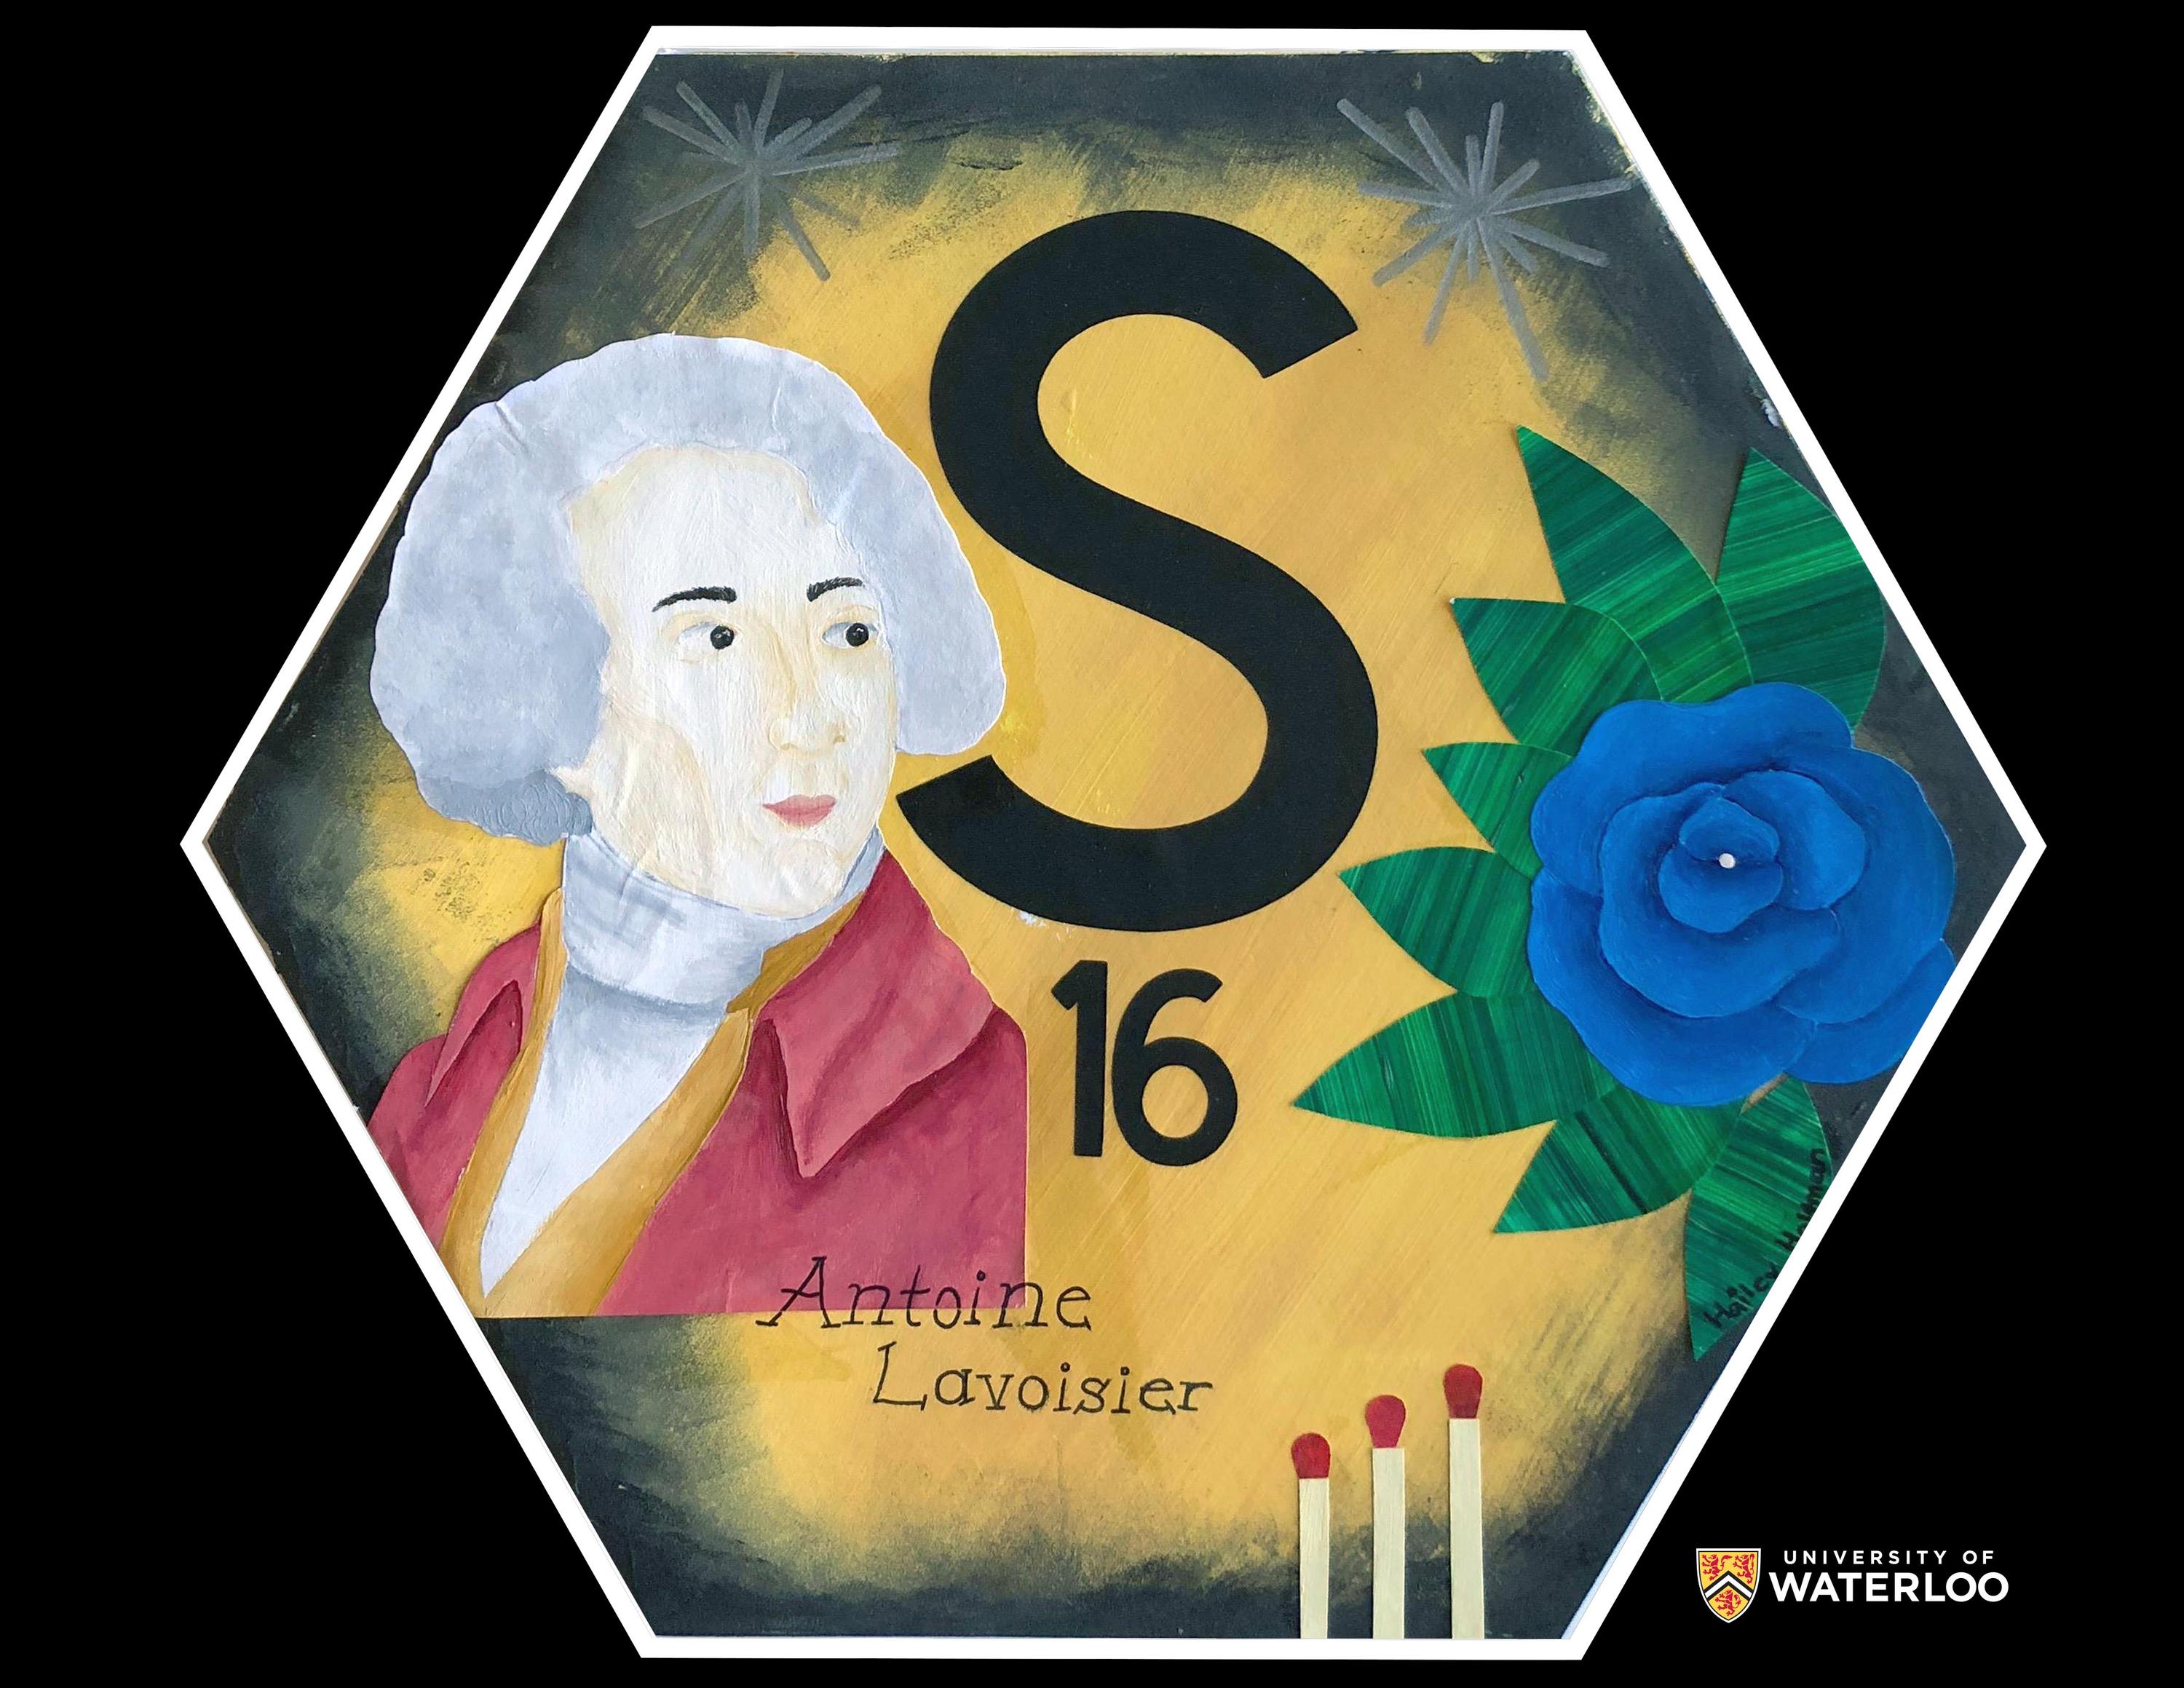 Decollage and acrylic on paper. Chemical symbol “S” and atomic number “16” centre. Portrait of Antoine Lavoisier left. Blue rose flower right. Three standing matches bottom. Background is a combination of yellow surrounded by charcoal black.